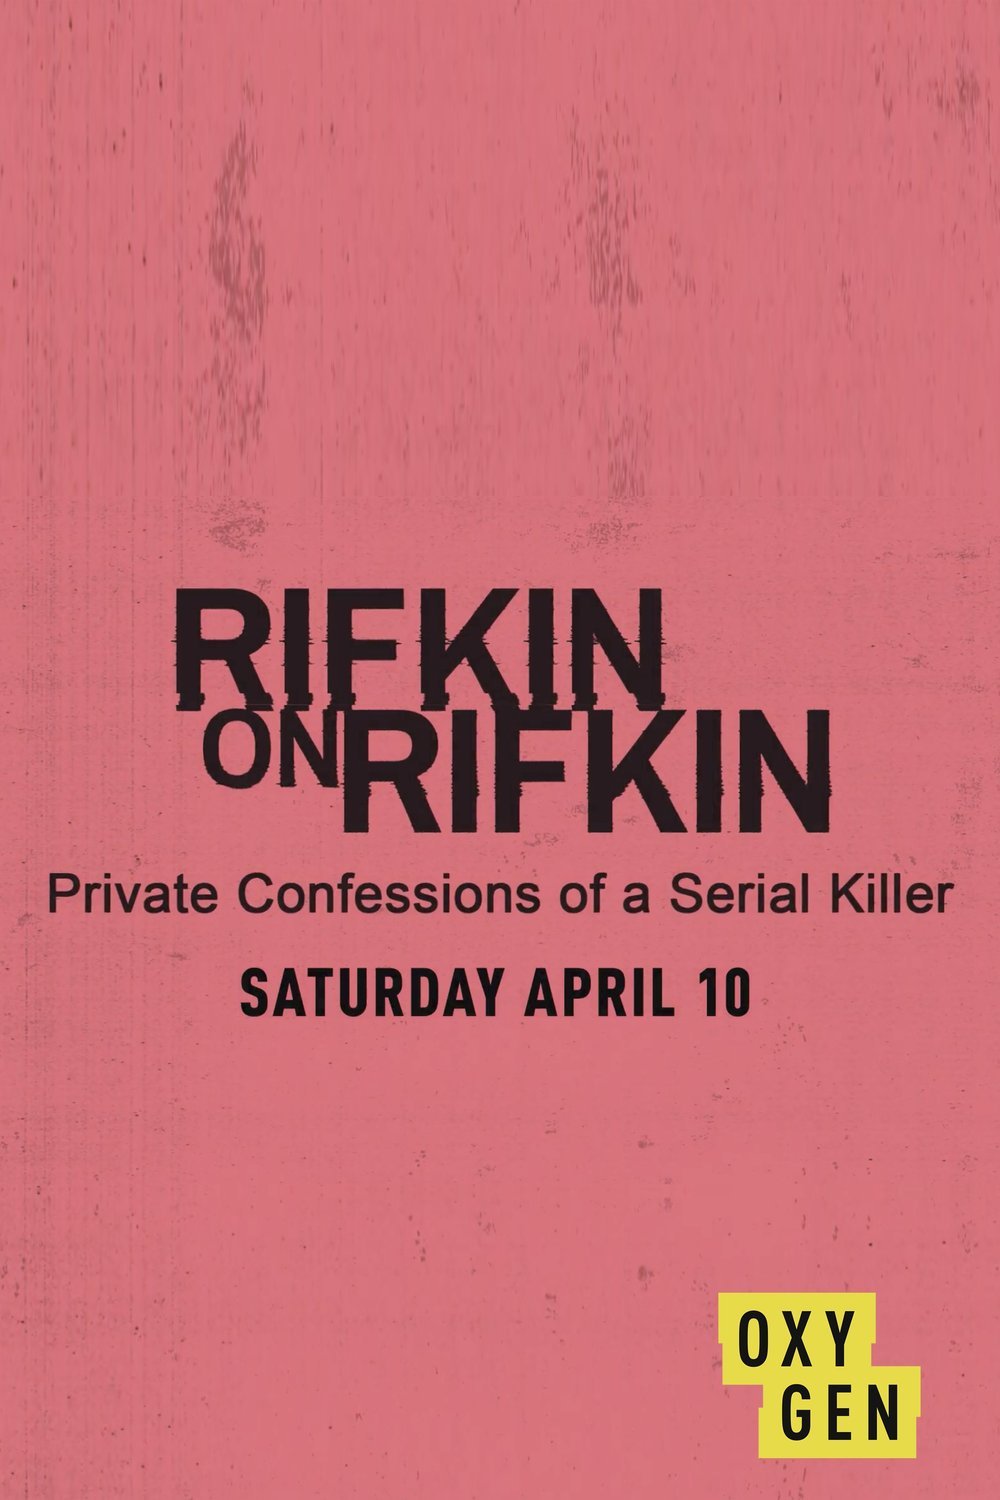 Poster of the movie Rifkin on Rifkin: Private Confessions of a Serial Killer